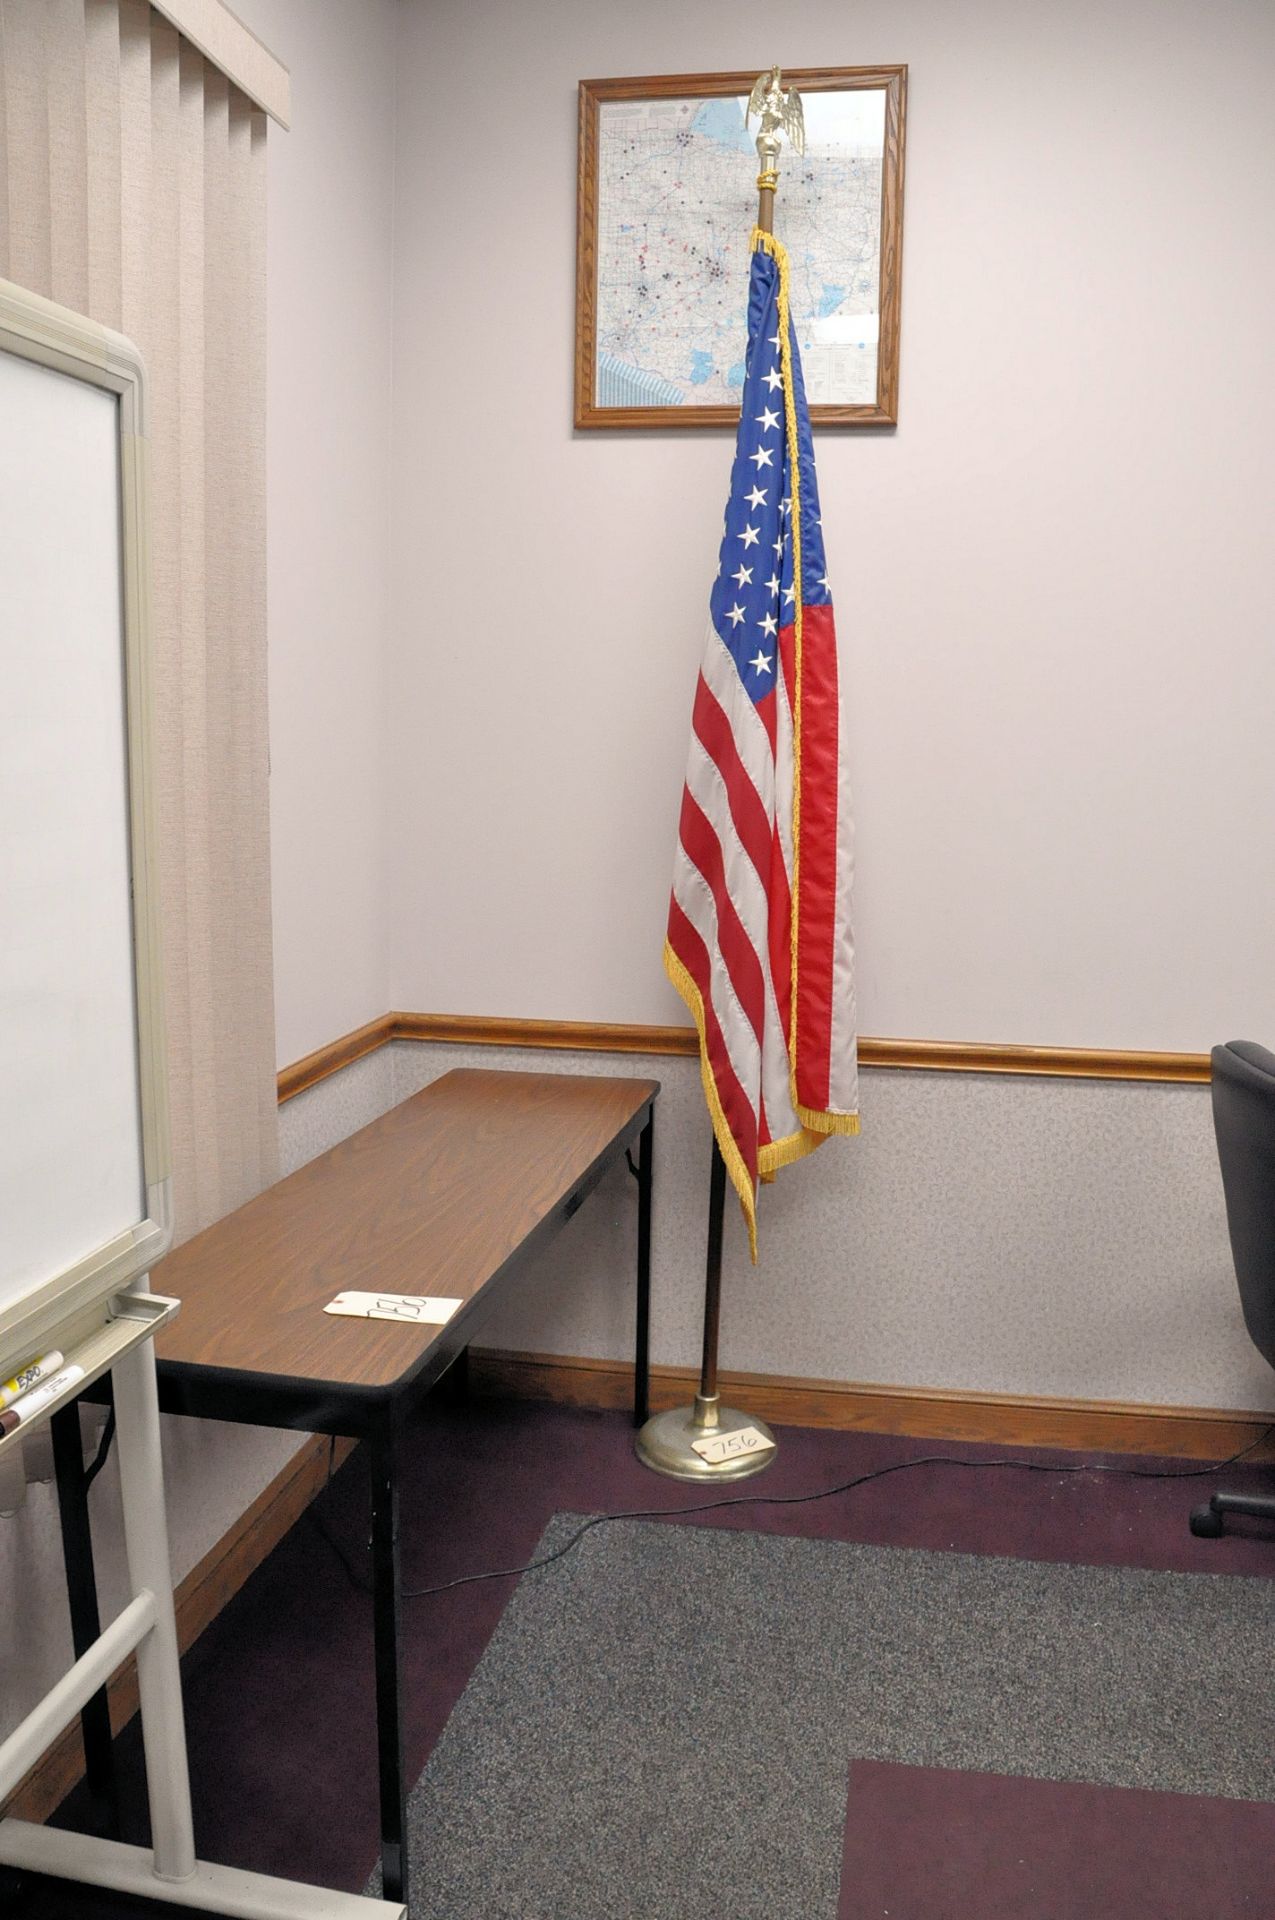 Lot-(1) Table, American Flag and Flag Stand, and Cabinet with Flowers, (Kaneta Conference Room)